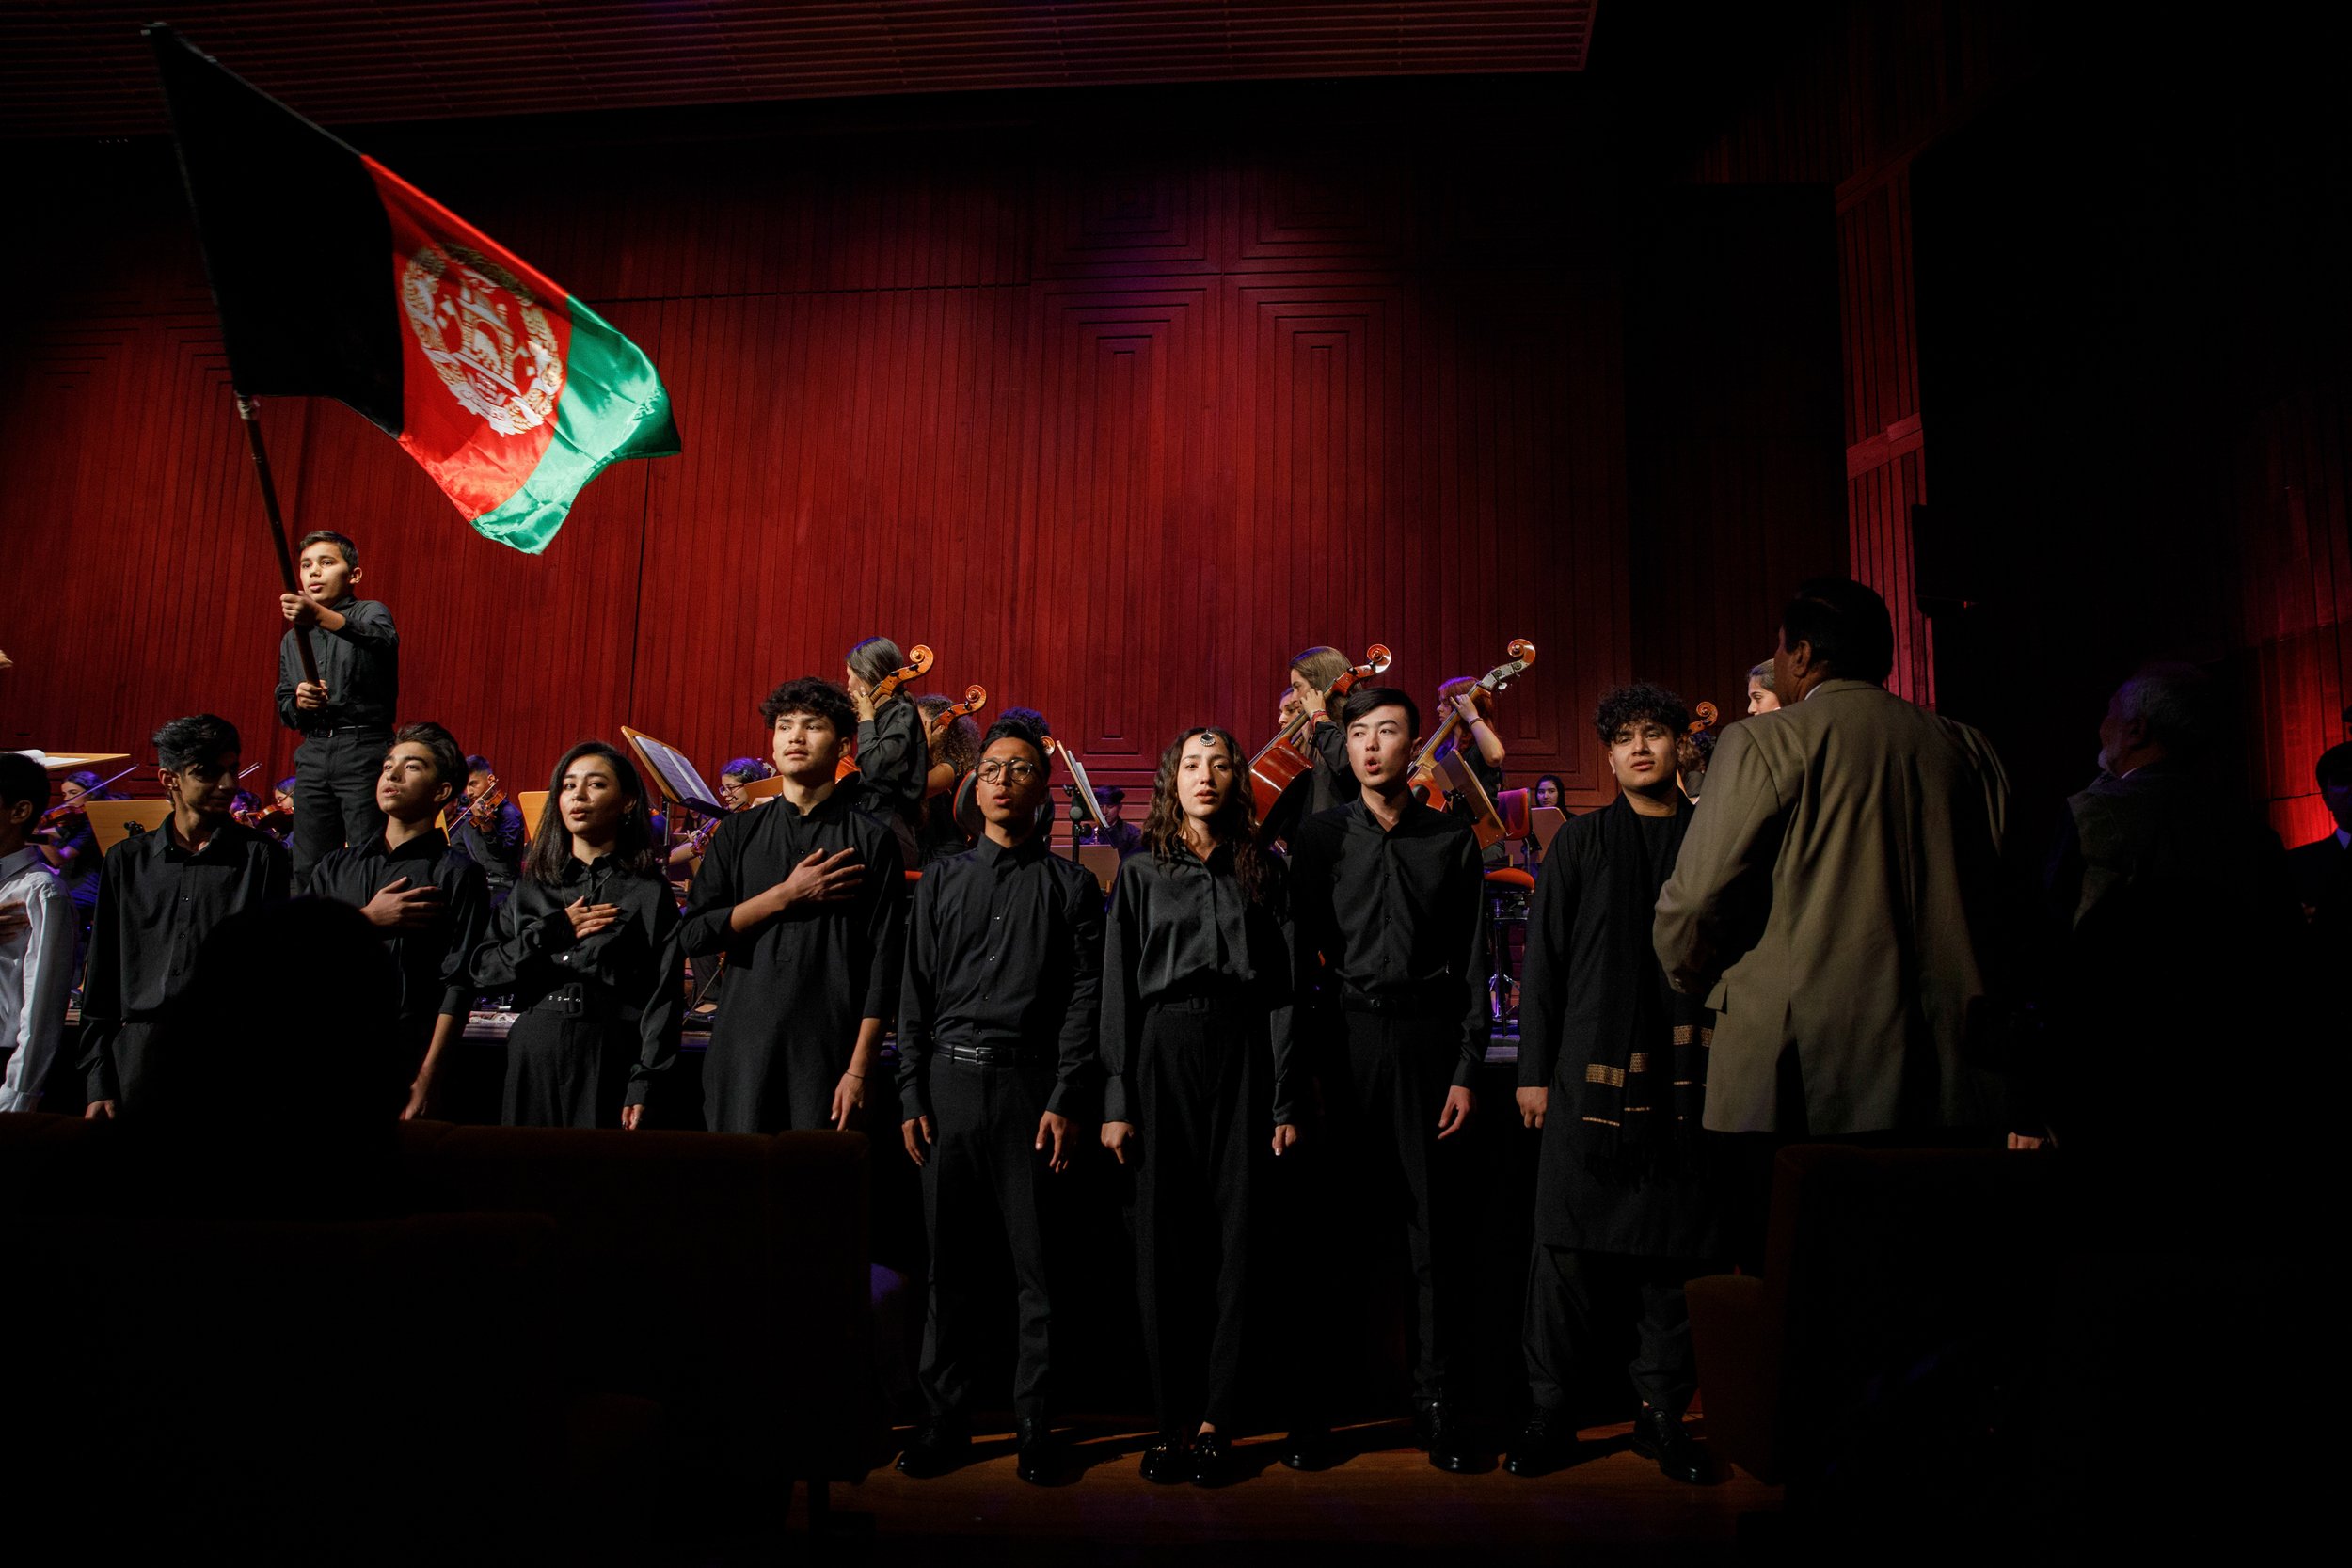  Students from Afghanistan’s National Institute of Music play and sing their national anthem at the Gulbenkian Foundation, the first concert in a major music hall since they were forced to flee their home. This was an emotional celebration of Afghan 